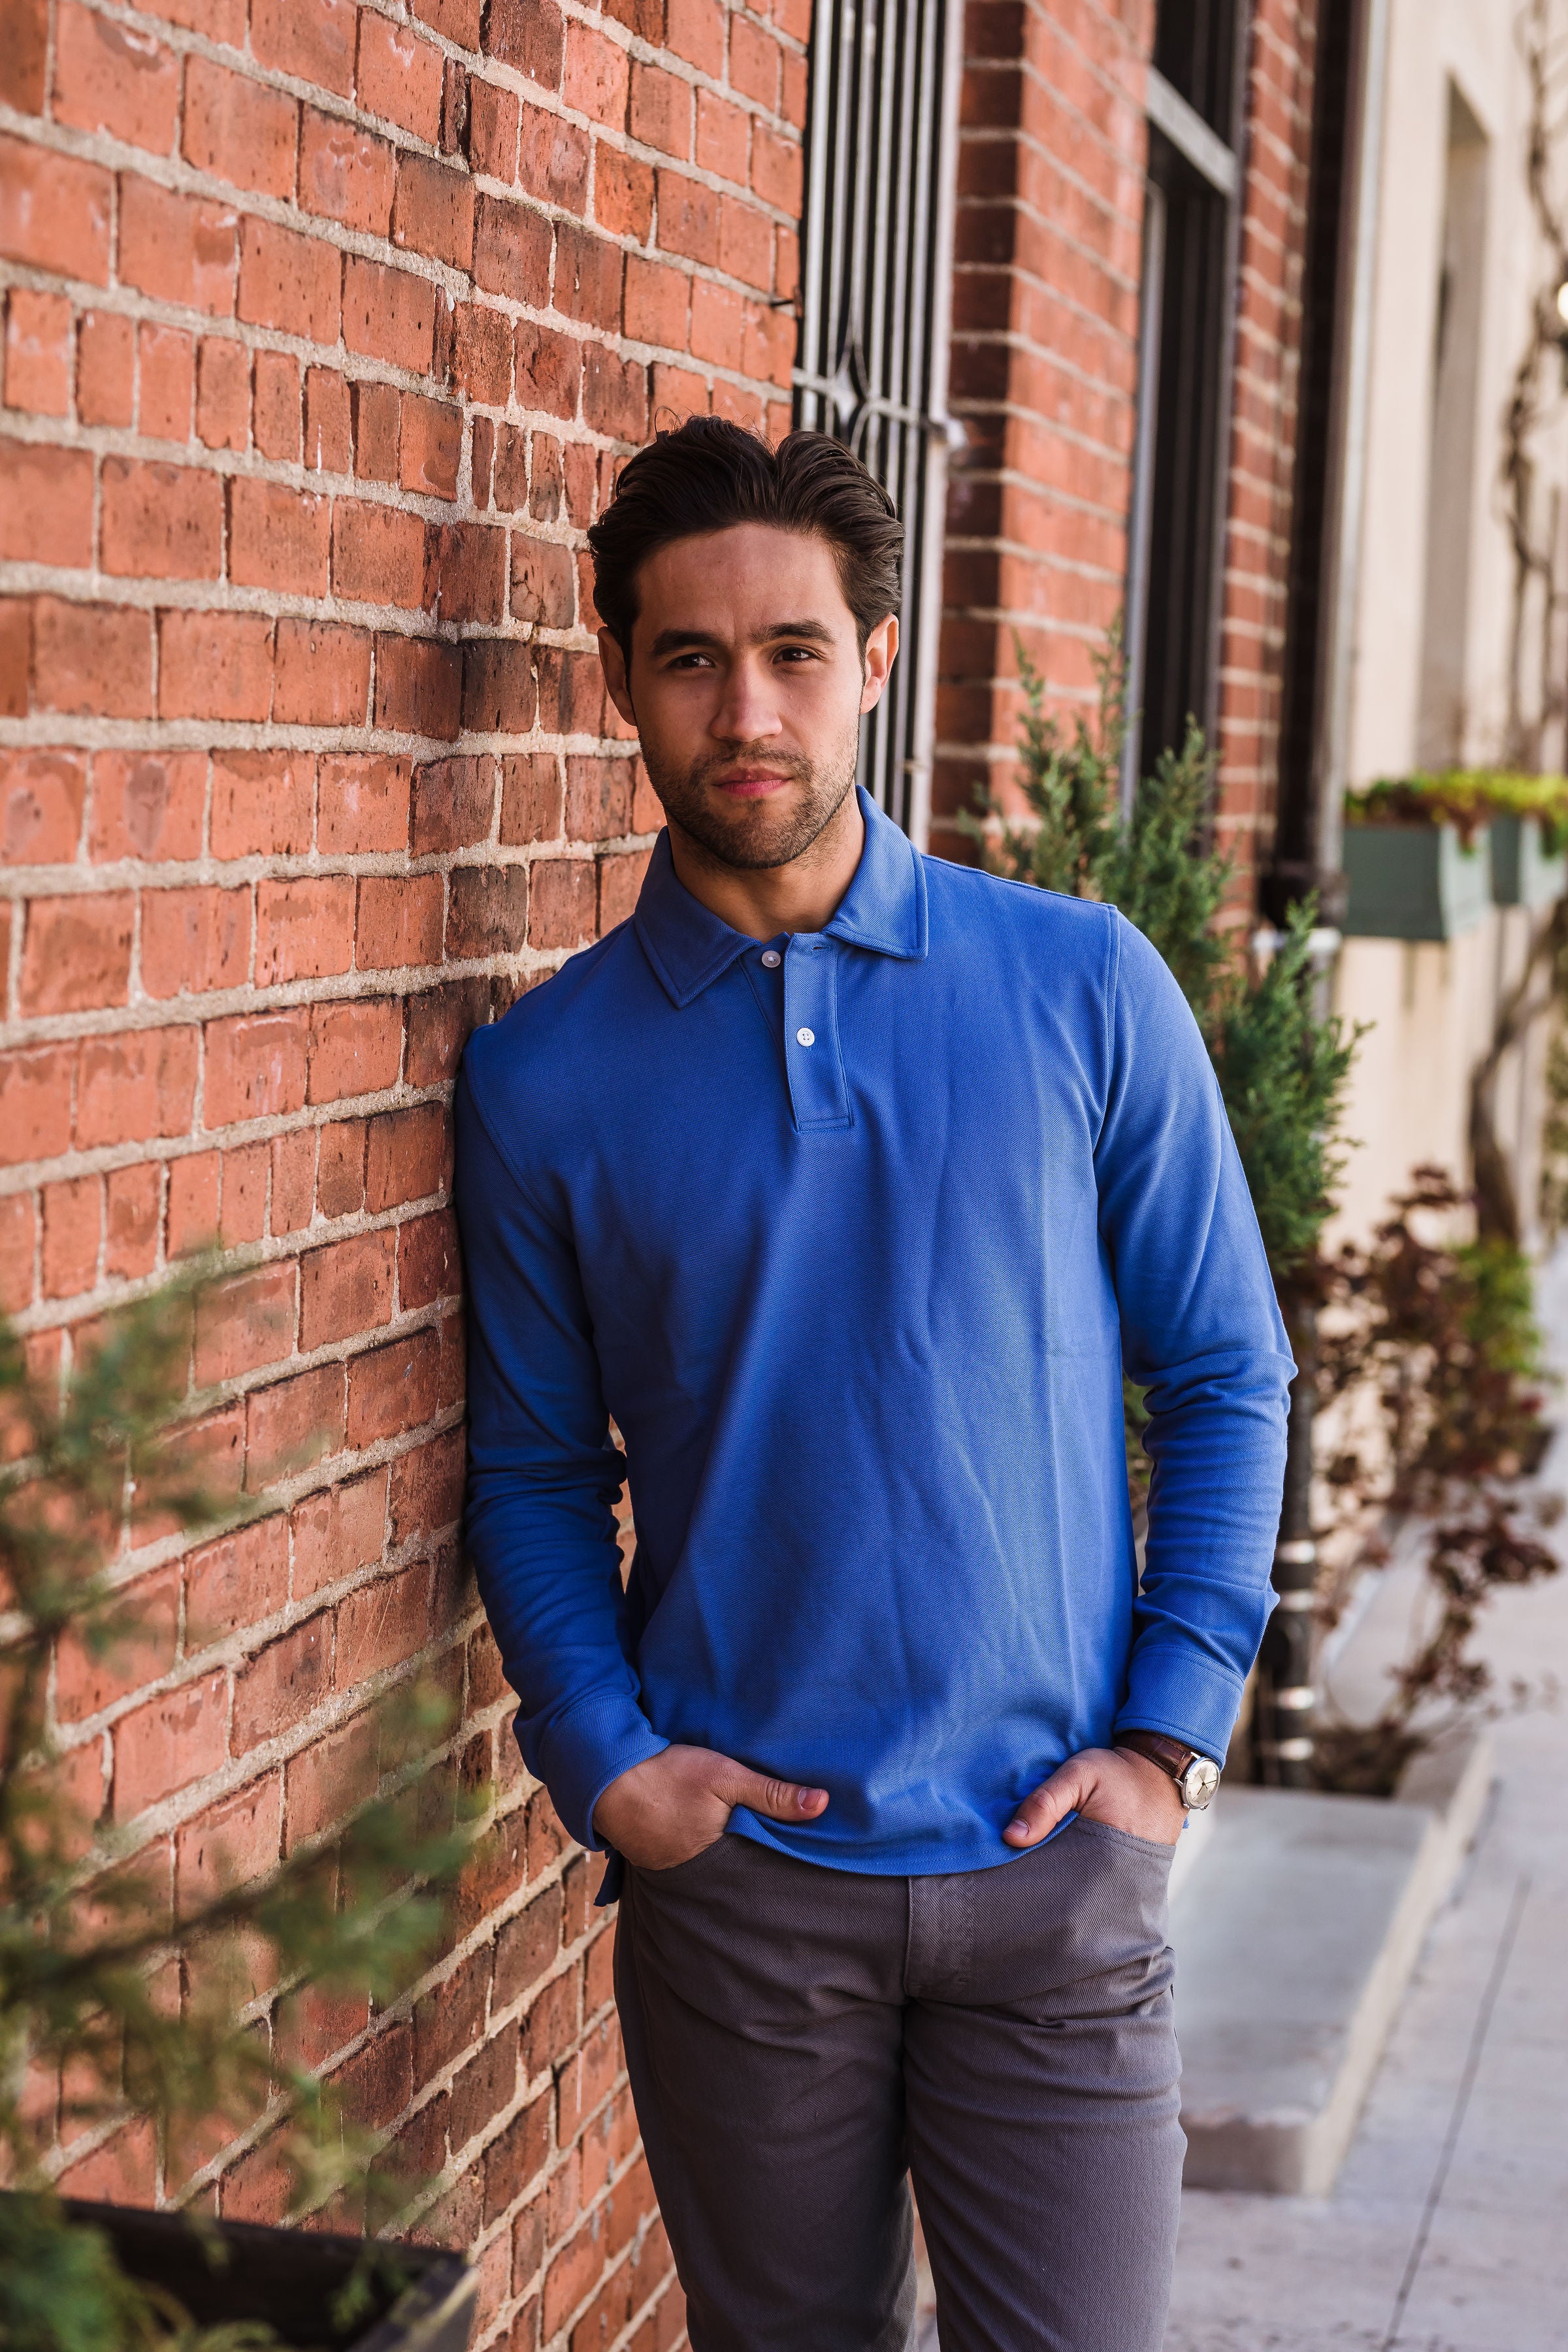 7 Types of Polo Shirts for Men  Peter Manning NYC – Peter Manning